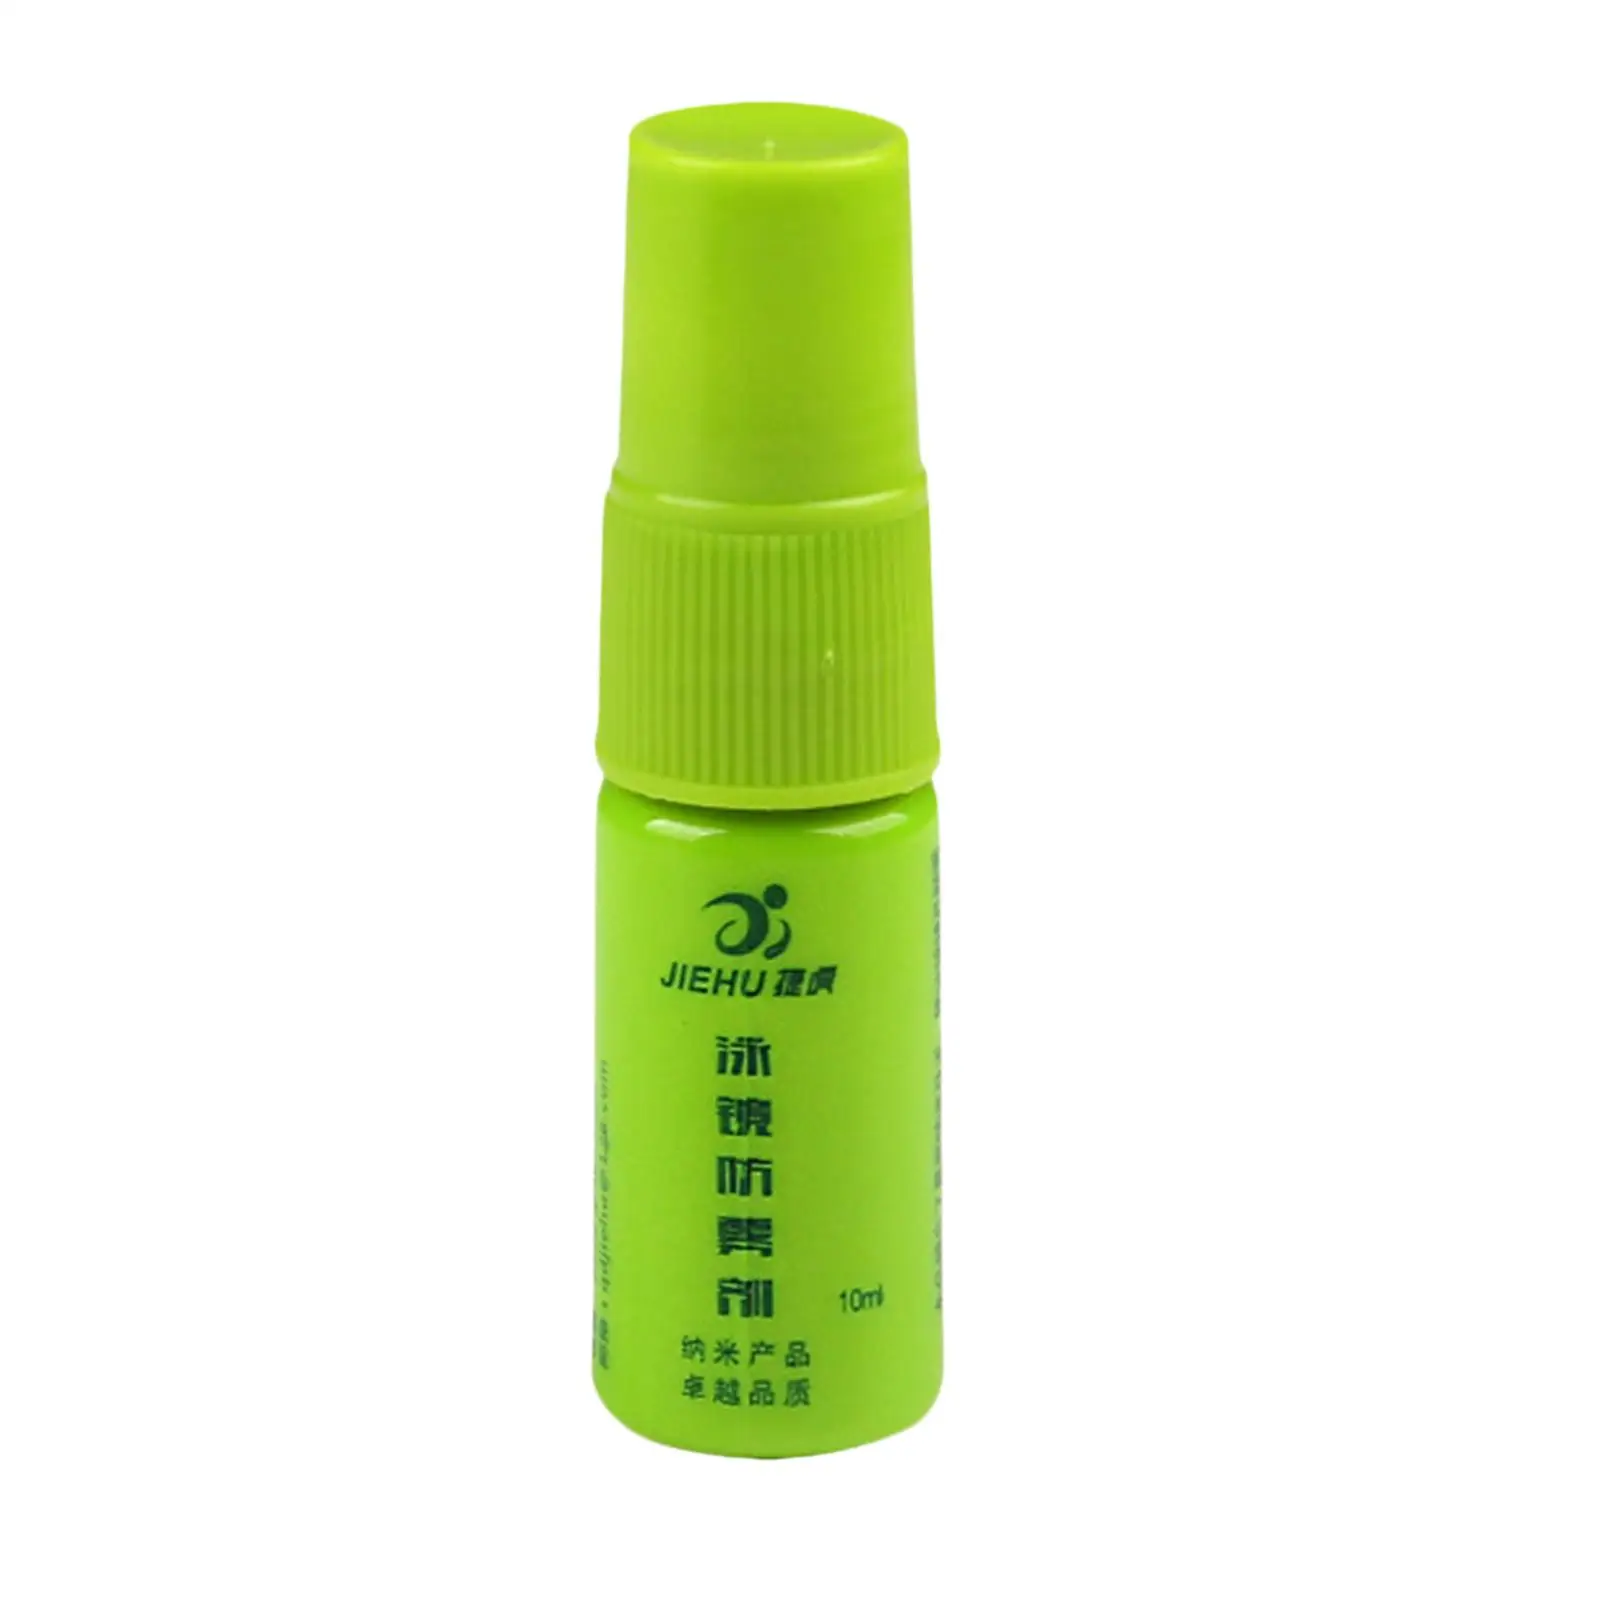 Afterglow Solid-State Anti Fog Spray for Glasses -AntiFog Spray for Goggles